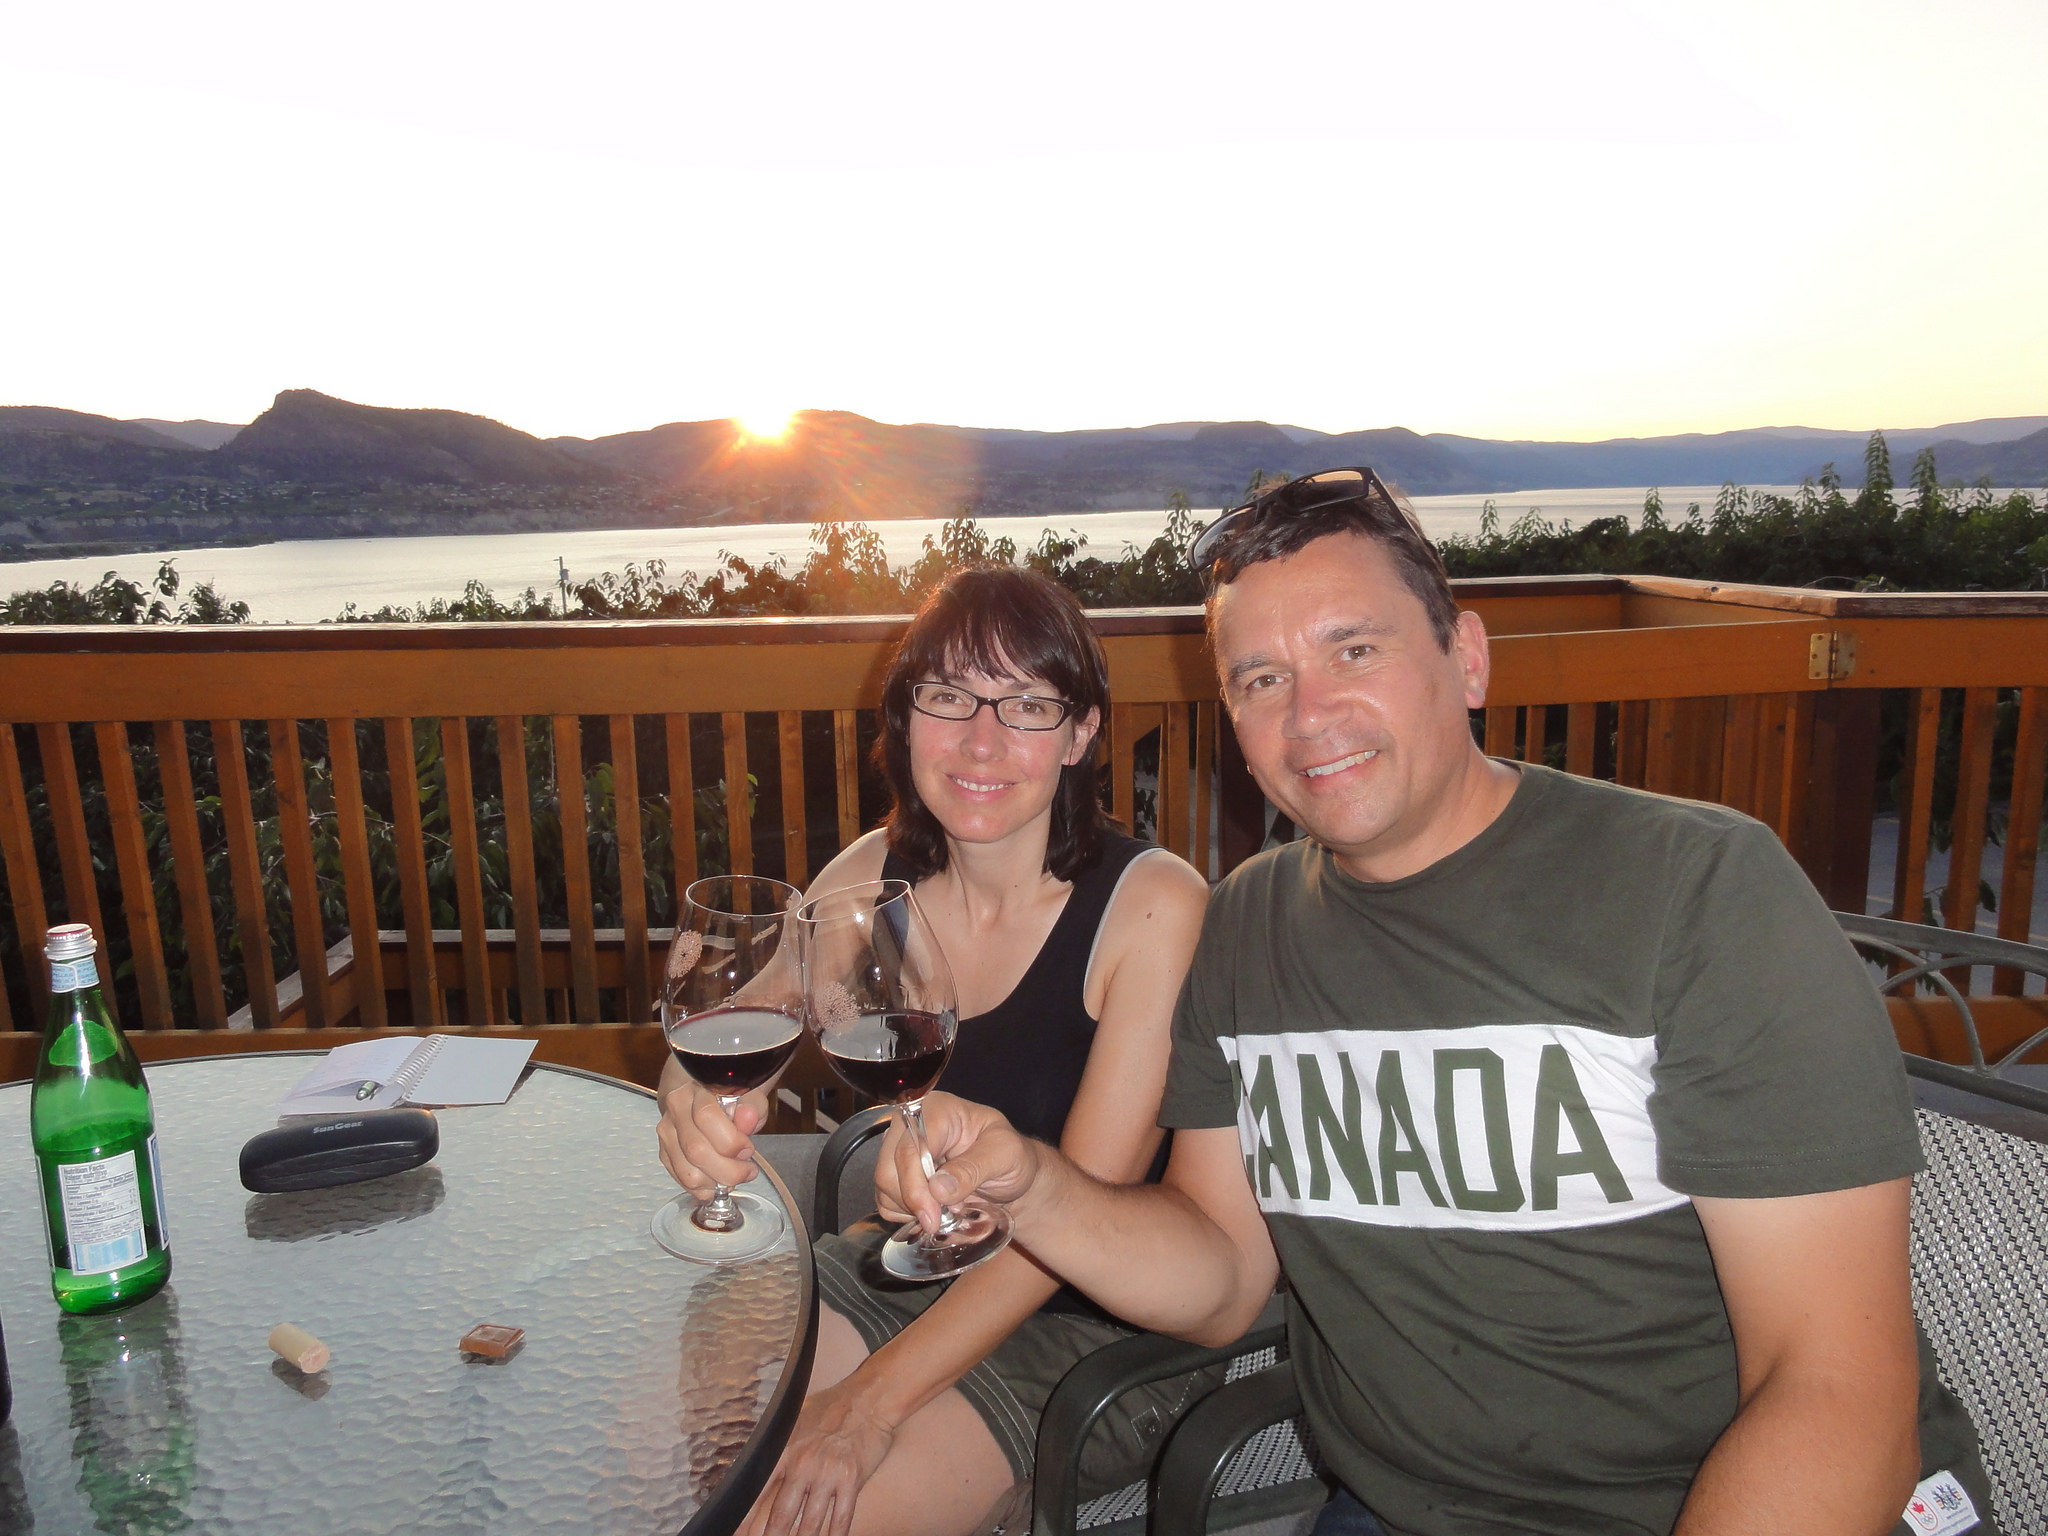 #BCWine adventure 2012: images of one of our favourite #wine trips